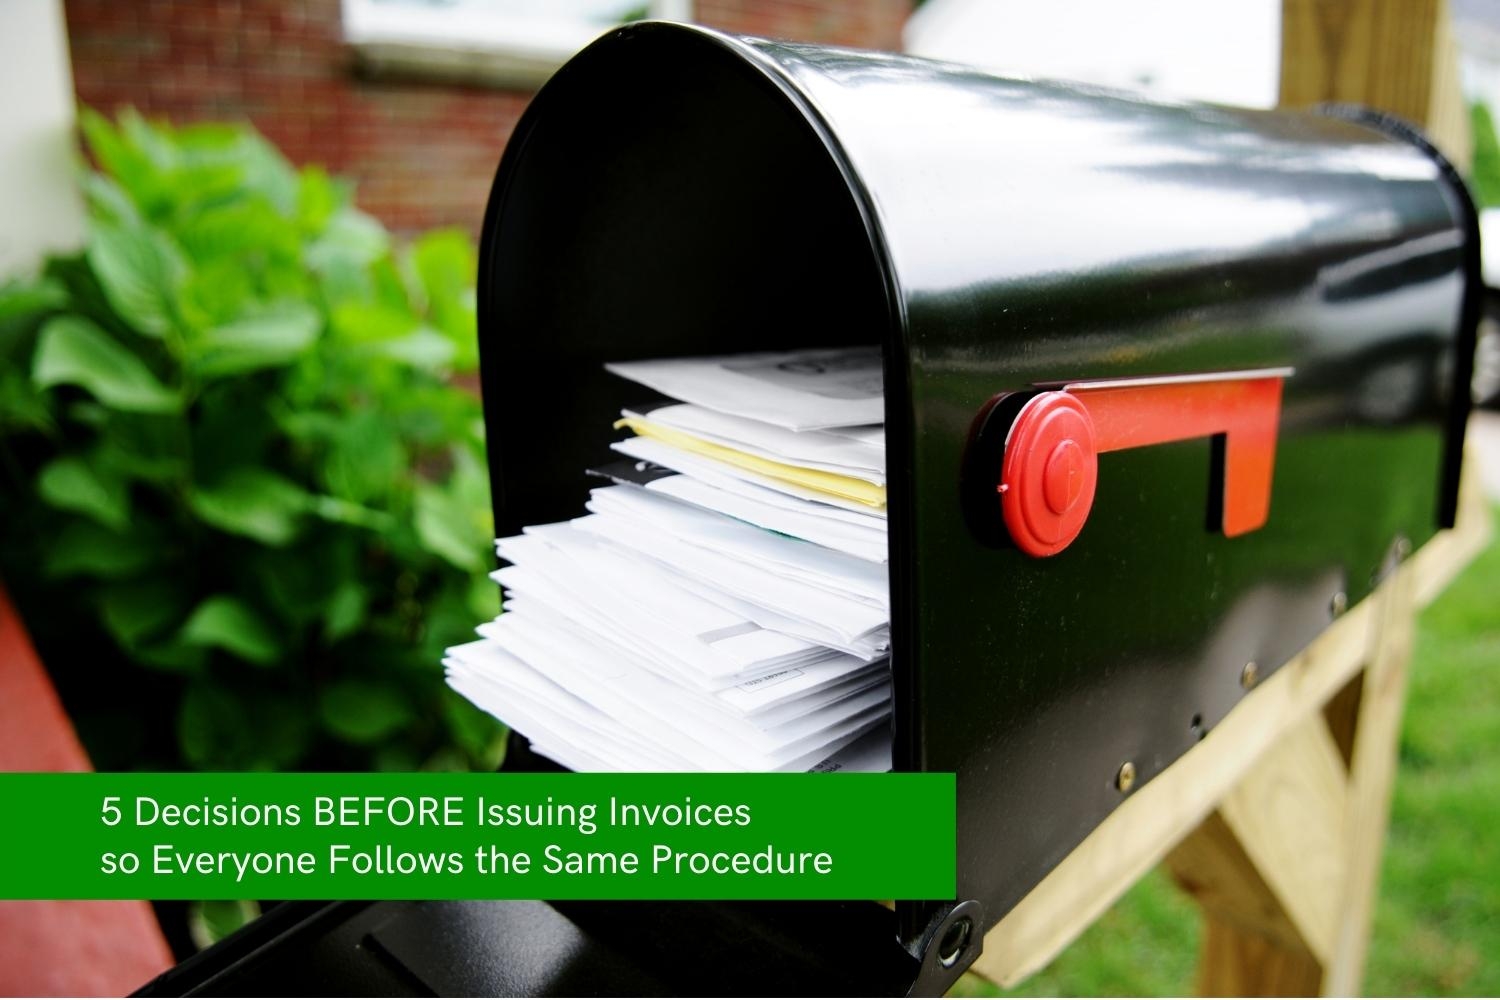 5 Decisions Before Issuing Invoices so Everyone Follows the Same Procedure